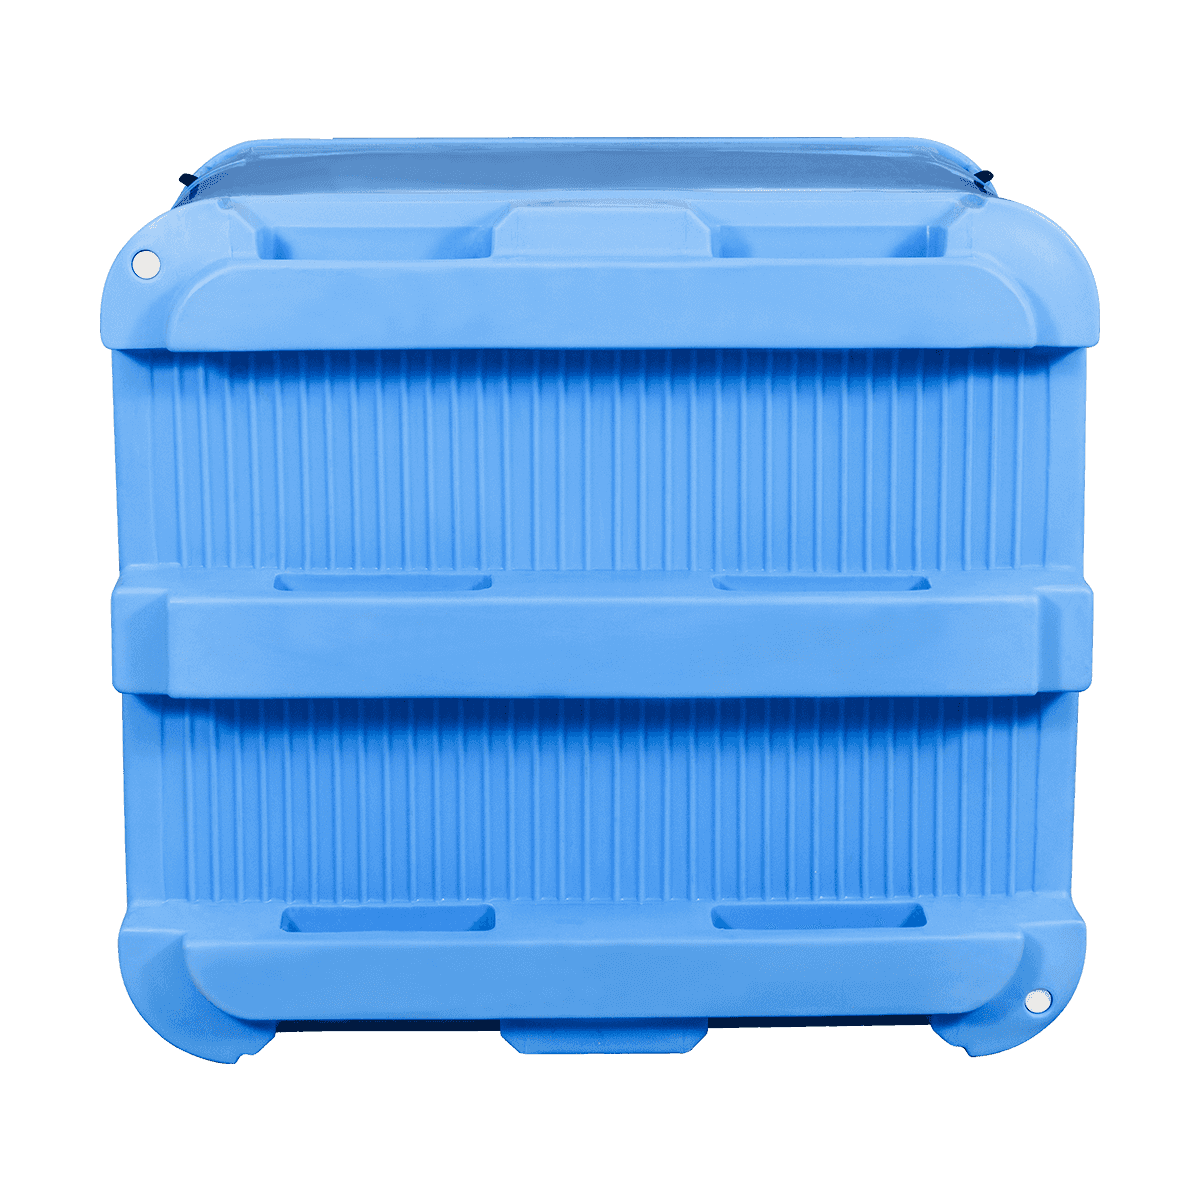 AF-800L Seafood Industrial Use Plastic Containers